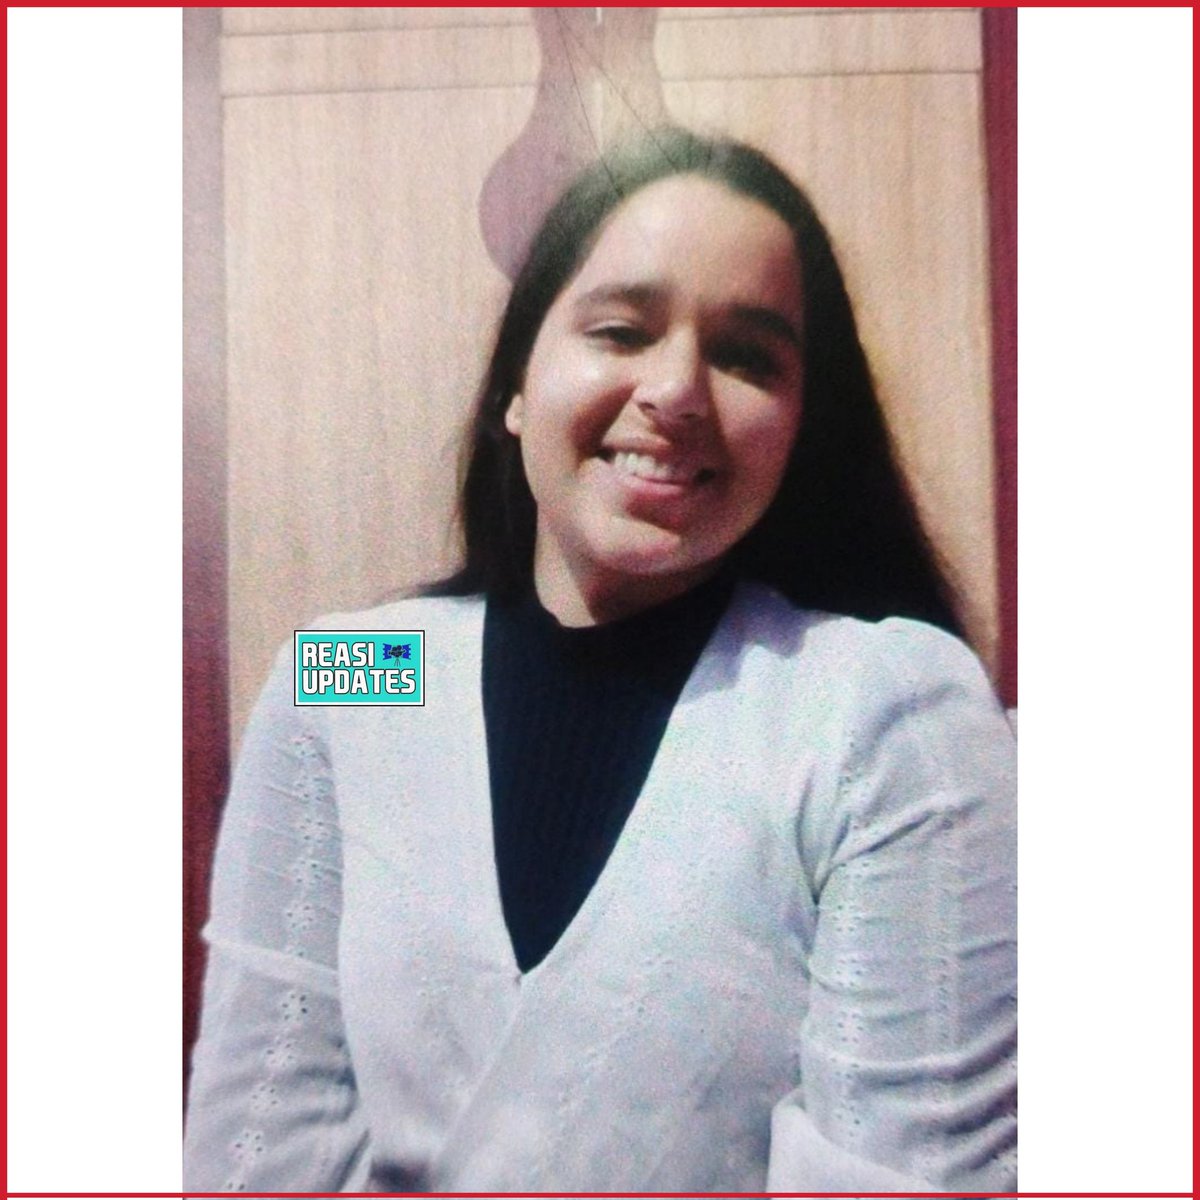 #12thResult #DistrictReasiToppers

Aasmi Wazir daughter of Smt. Dally Wazir & Ashok Singh resident of Nai Basti, Reasi & student of Govt. Girls Higher Secondary School Reasi got 465 marks out of 500 (93%) in Medical Stream in Class 12th JKBOSE Result.

#ReasiUpdates #Reasi